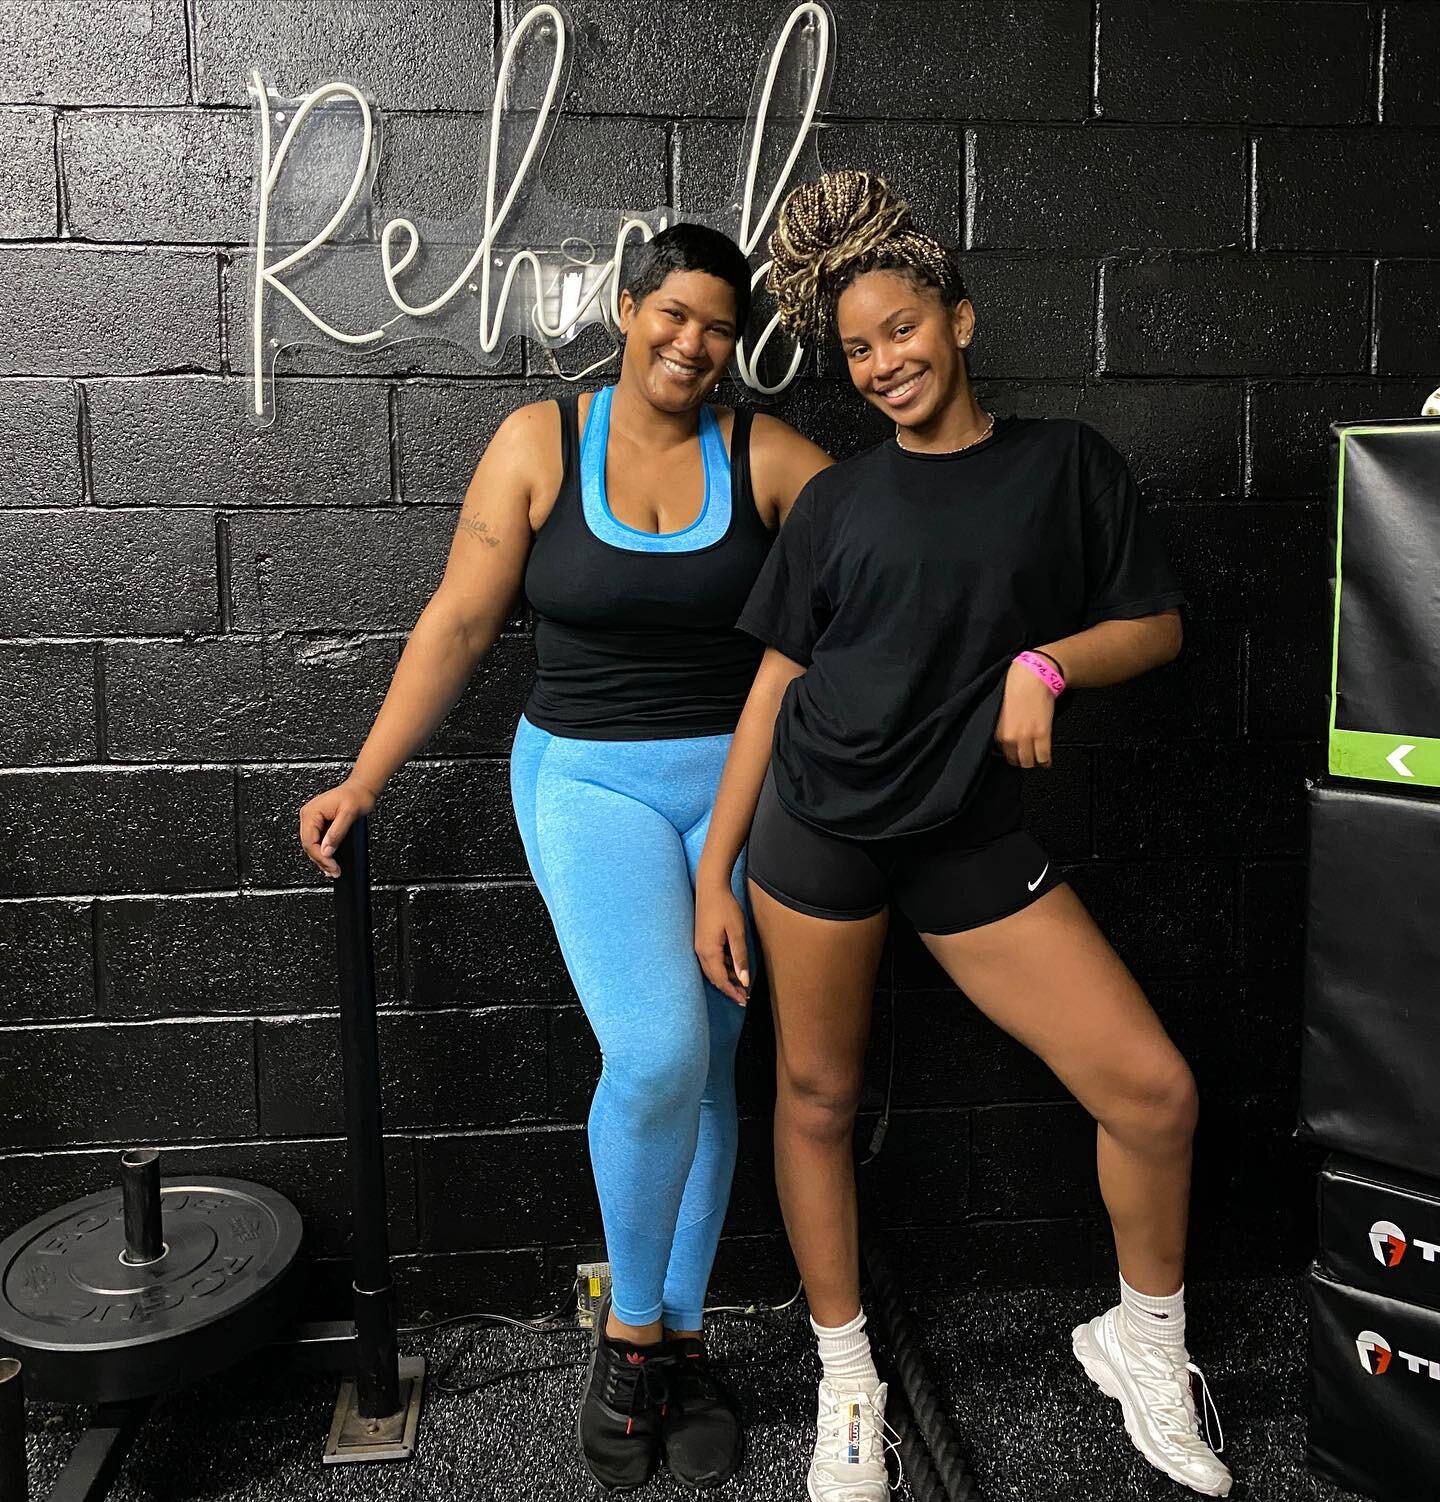 We love a mom &amp; daughter workout duo. ❤️&zwj;🔥🙌🏽

Upper Body &amp; Core Class w/ @bodybyshi_  tonight at 6:30pm. 

Sign up using the link in bio. See you soon! 

#rehabbyqui #bodybyshi #momdaughtherduo #strongwomen